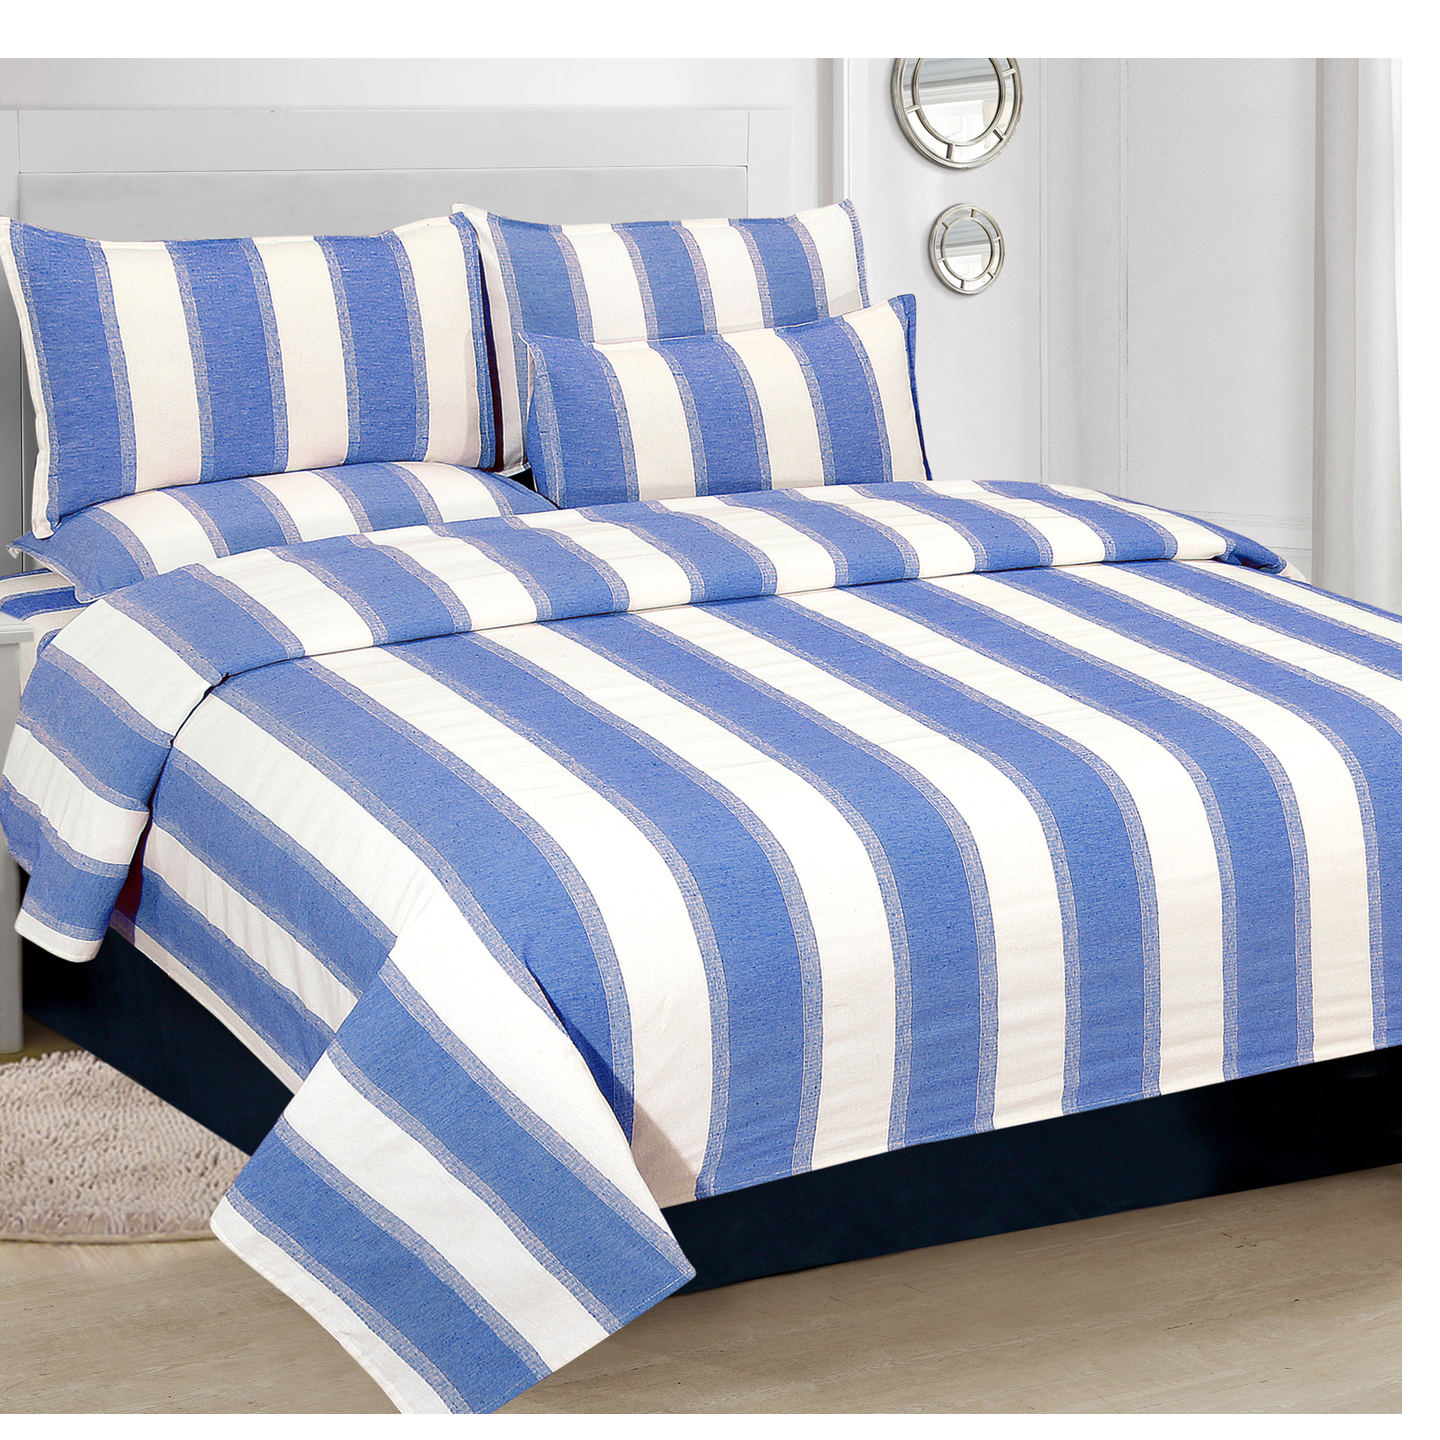 Handtex Home Cotton Double Bedsheet with 2 Pillow Covers बेडशीट डबल बेड Blue 90x100inch